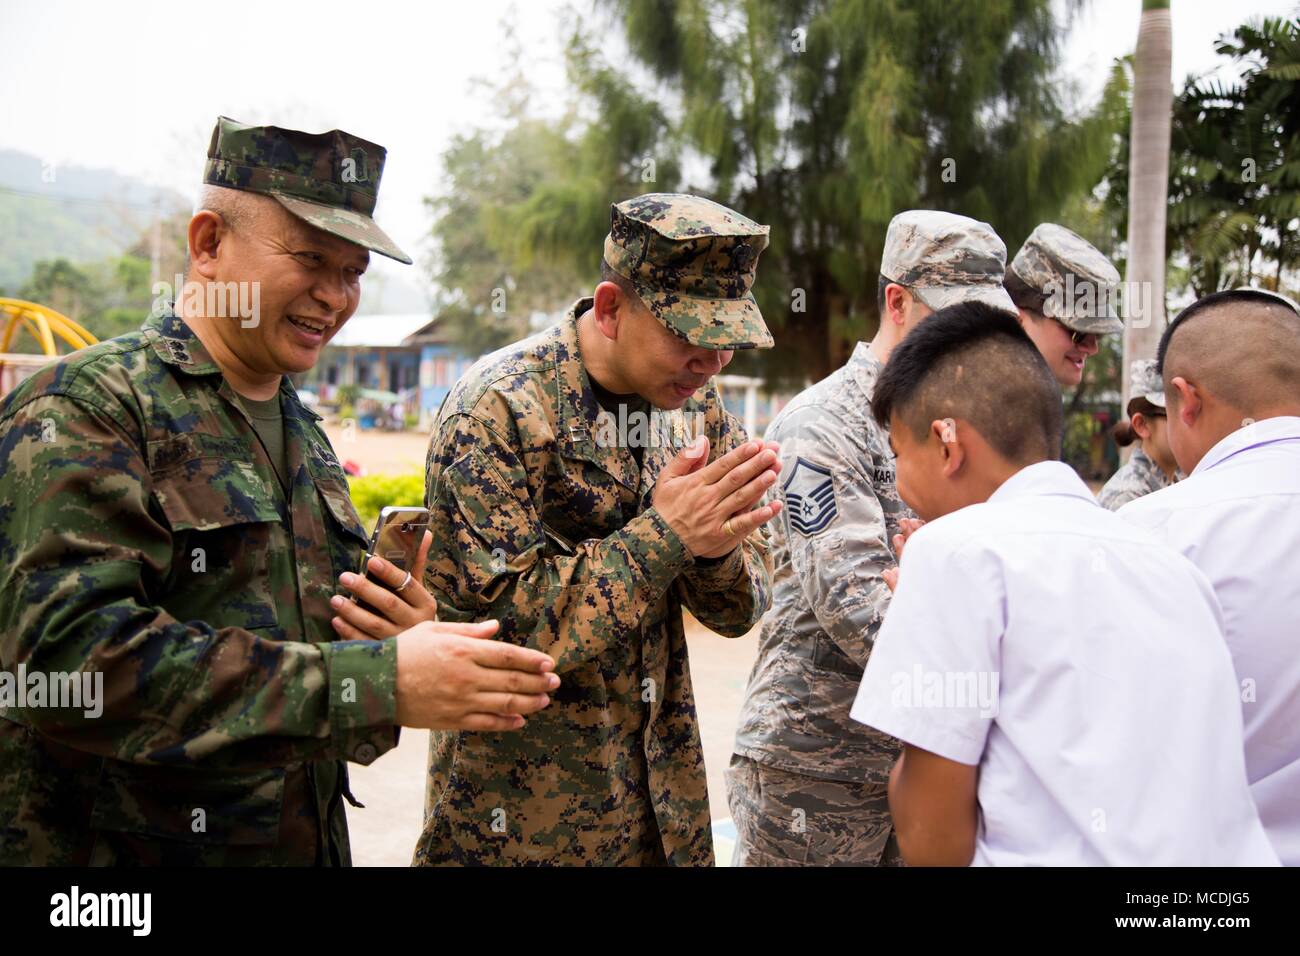 U.S. Navy Lt. Aroon Seeda bows to show thankfulness towards students during Exercise Cobra Gold 2018 at Pong Ka Sang School in Nakhon Ratchasima, Kingdom of Thailand, Feb. 20, 2018. Chaplain Seeda was Born and raised in Pluak Daeng, Rayong province, Kingdom of Thailand as a Buddhist monk and immigrated to the United States in 2001 before joining the Navy Reserve in 2008. Humanitarian civic assistance projects conducted during the exercise support the needs and humanitarian interests of the Thai people. Cobra Gold 18 is an annual exercise conducted in the Kingdom of Thailand and runs from Feb.  Stock Photo